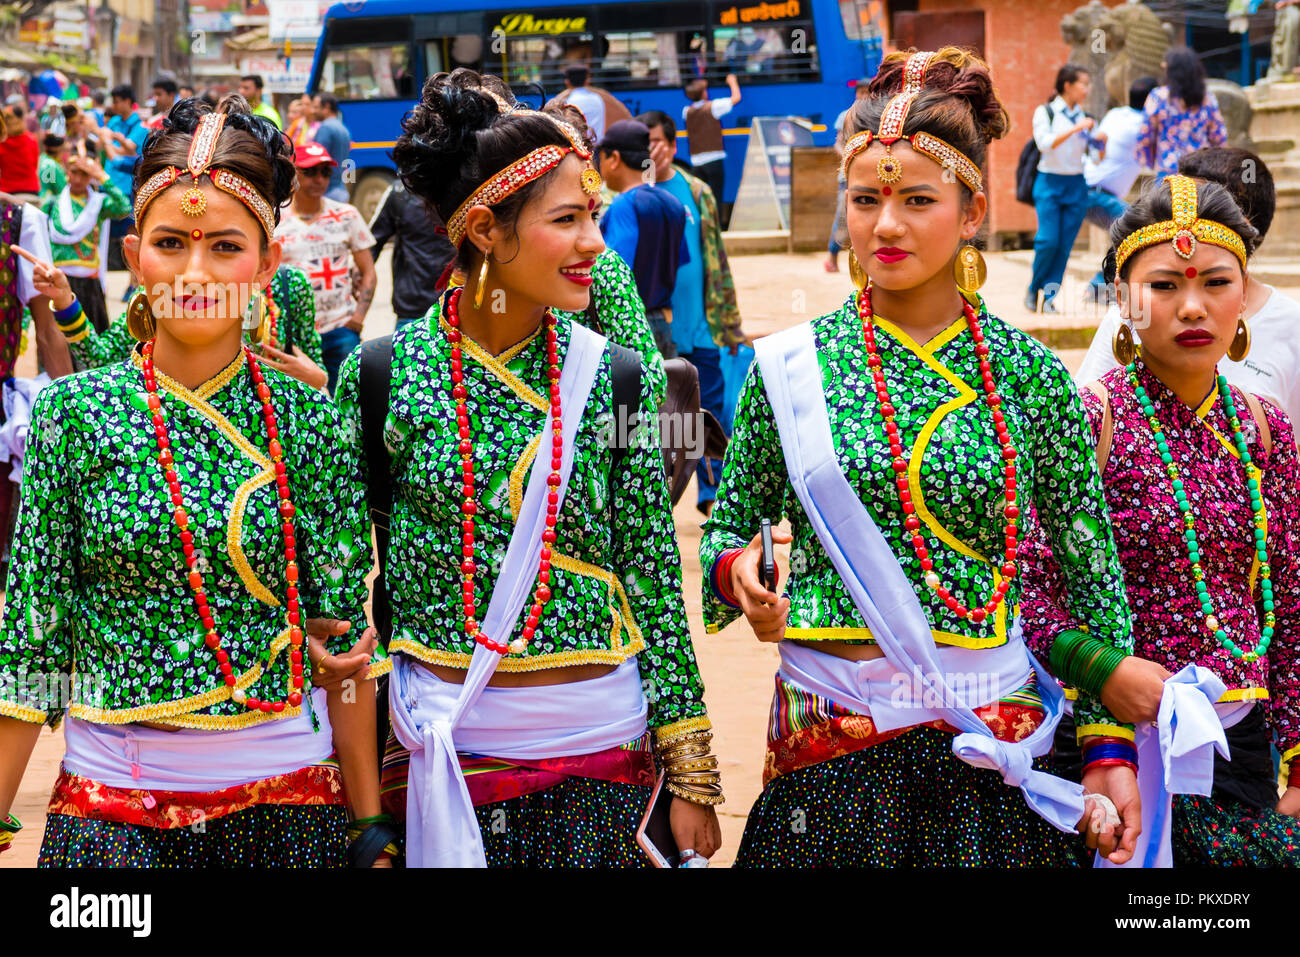 Patan, Lalitpur, Nepal - July 17, 2018 : Group of dancers wearing traditional costumes in Patan Durbar Square, UNESCO World Heritage Site Stock Photo